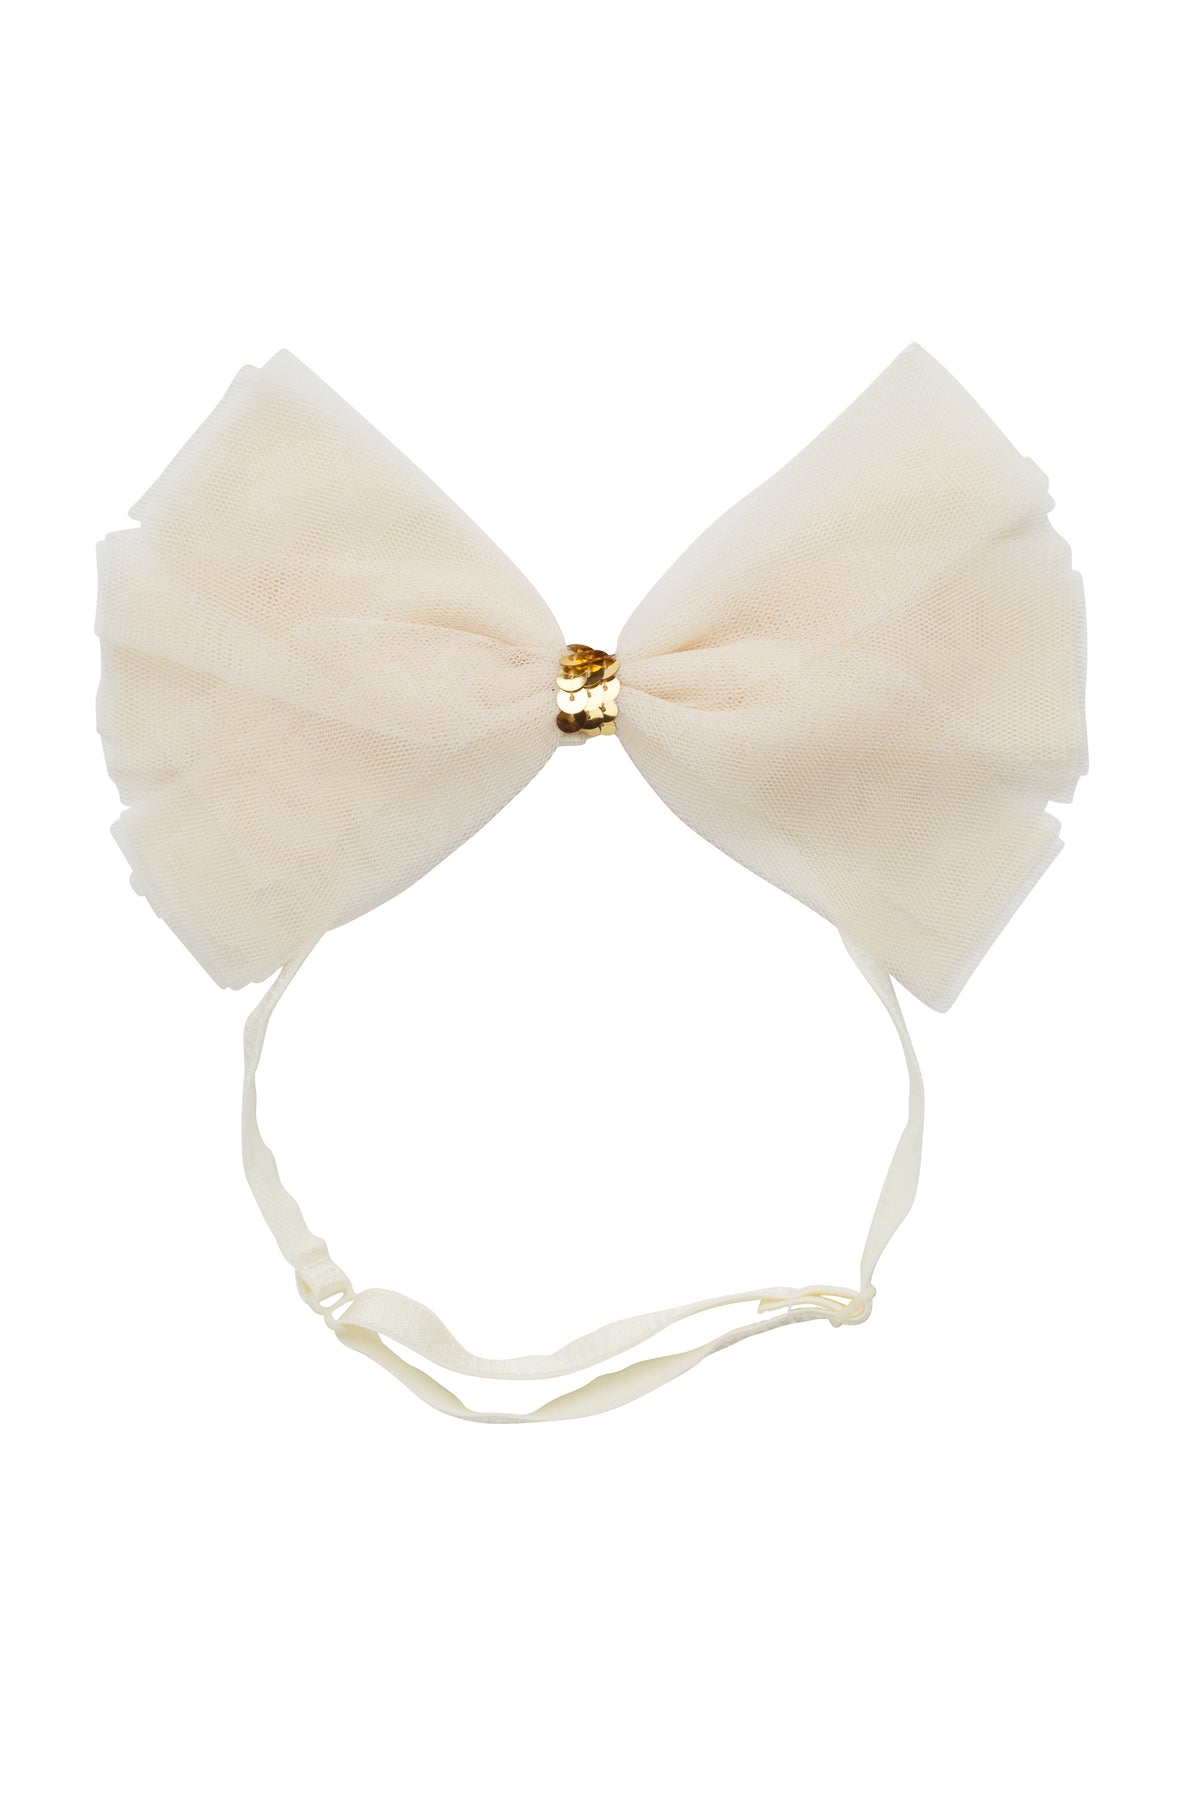 Soft Tulle Strips CLIP + WRAP - Ivory – PROJECT 6